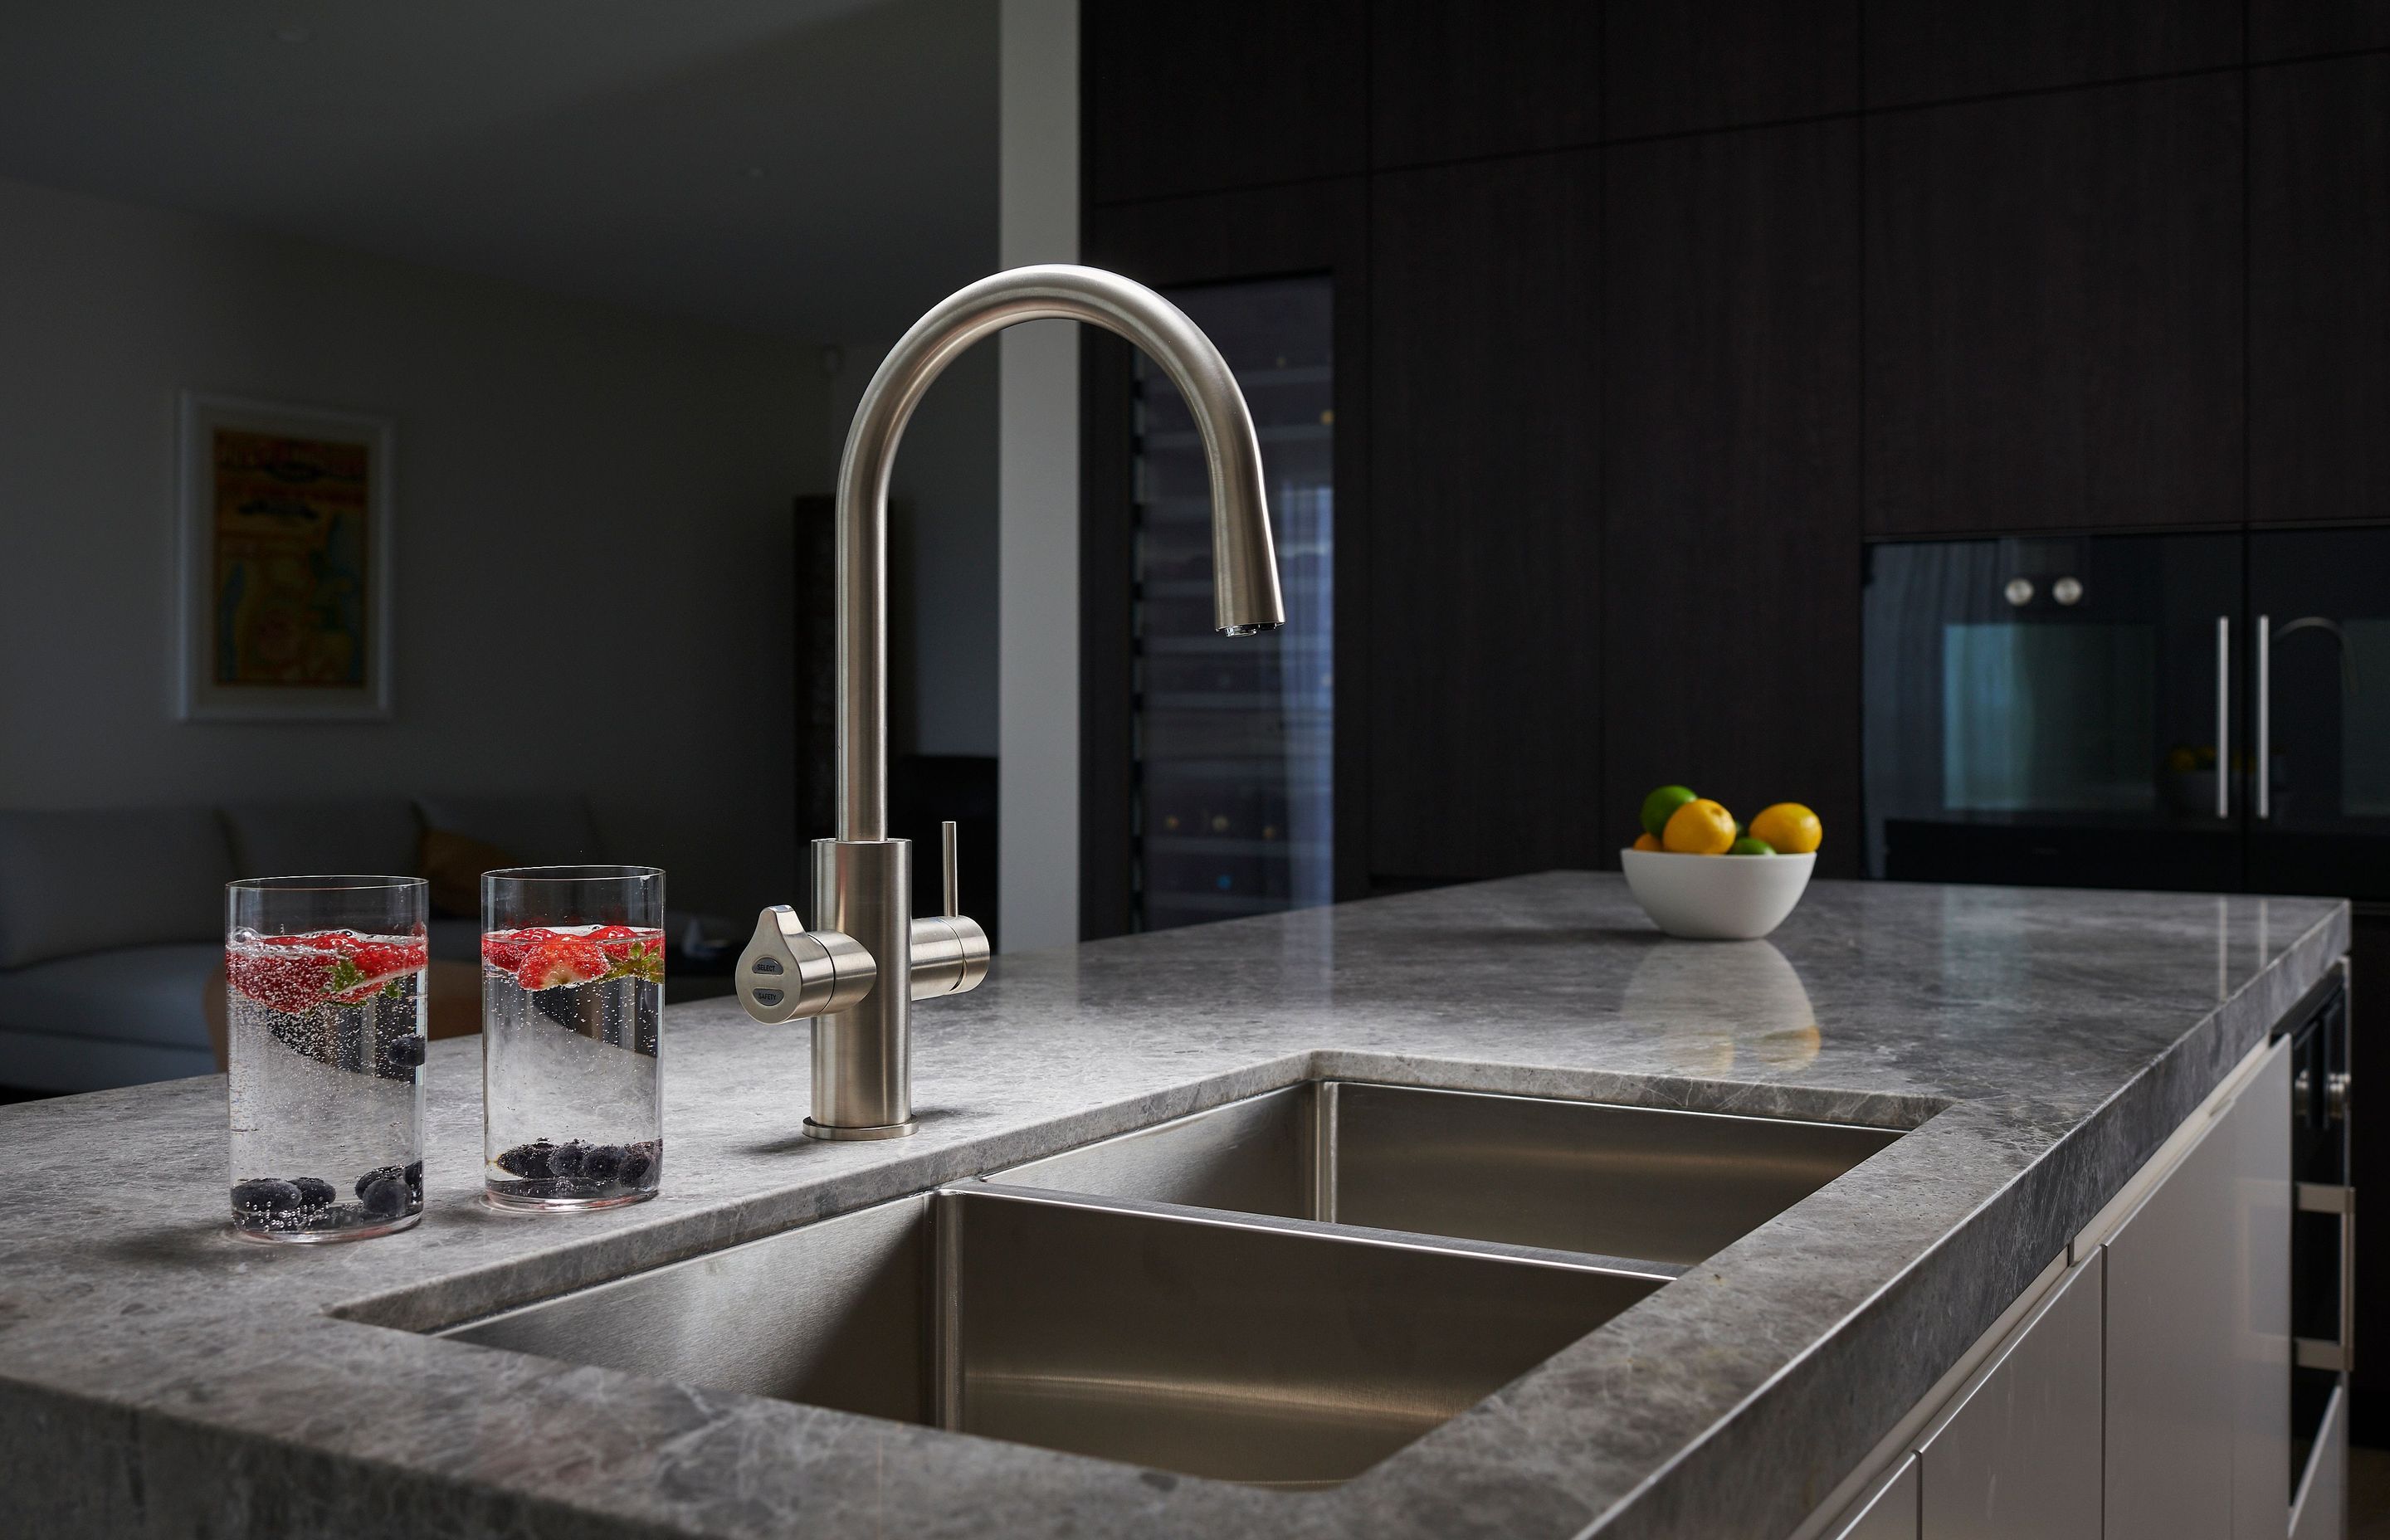 Chilled, sparkling, boiling, ambient – a tap that innovates how we drink water